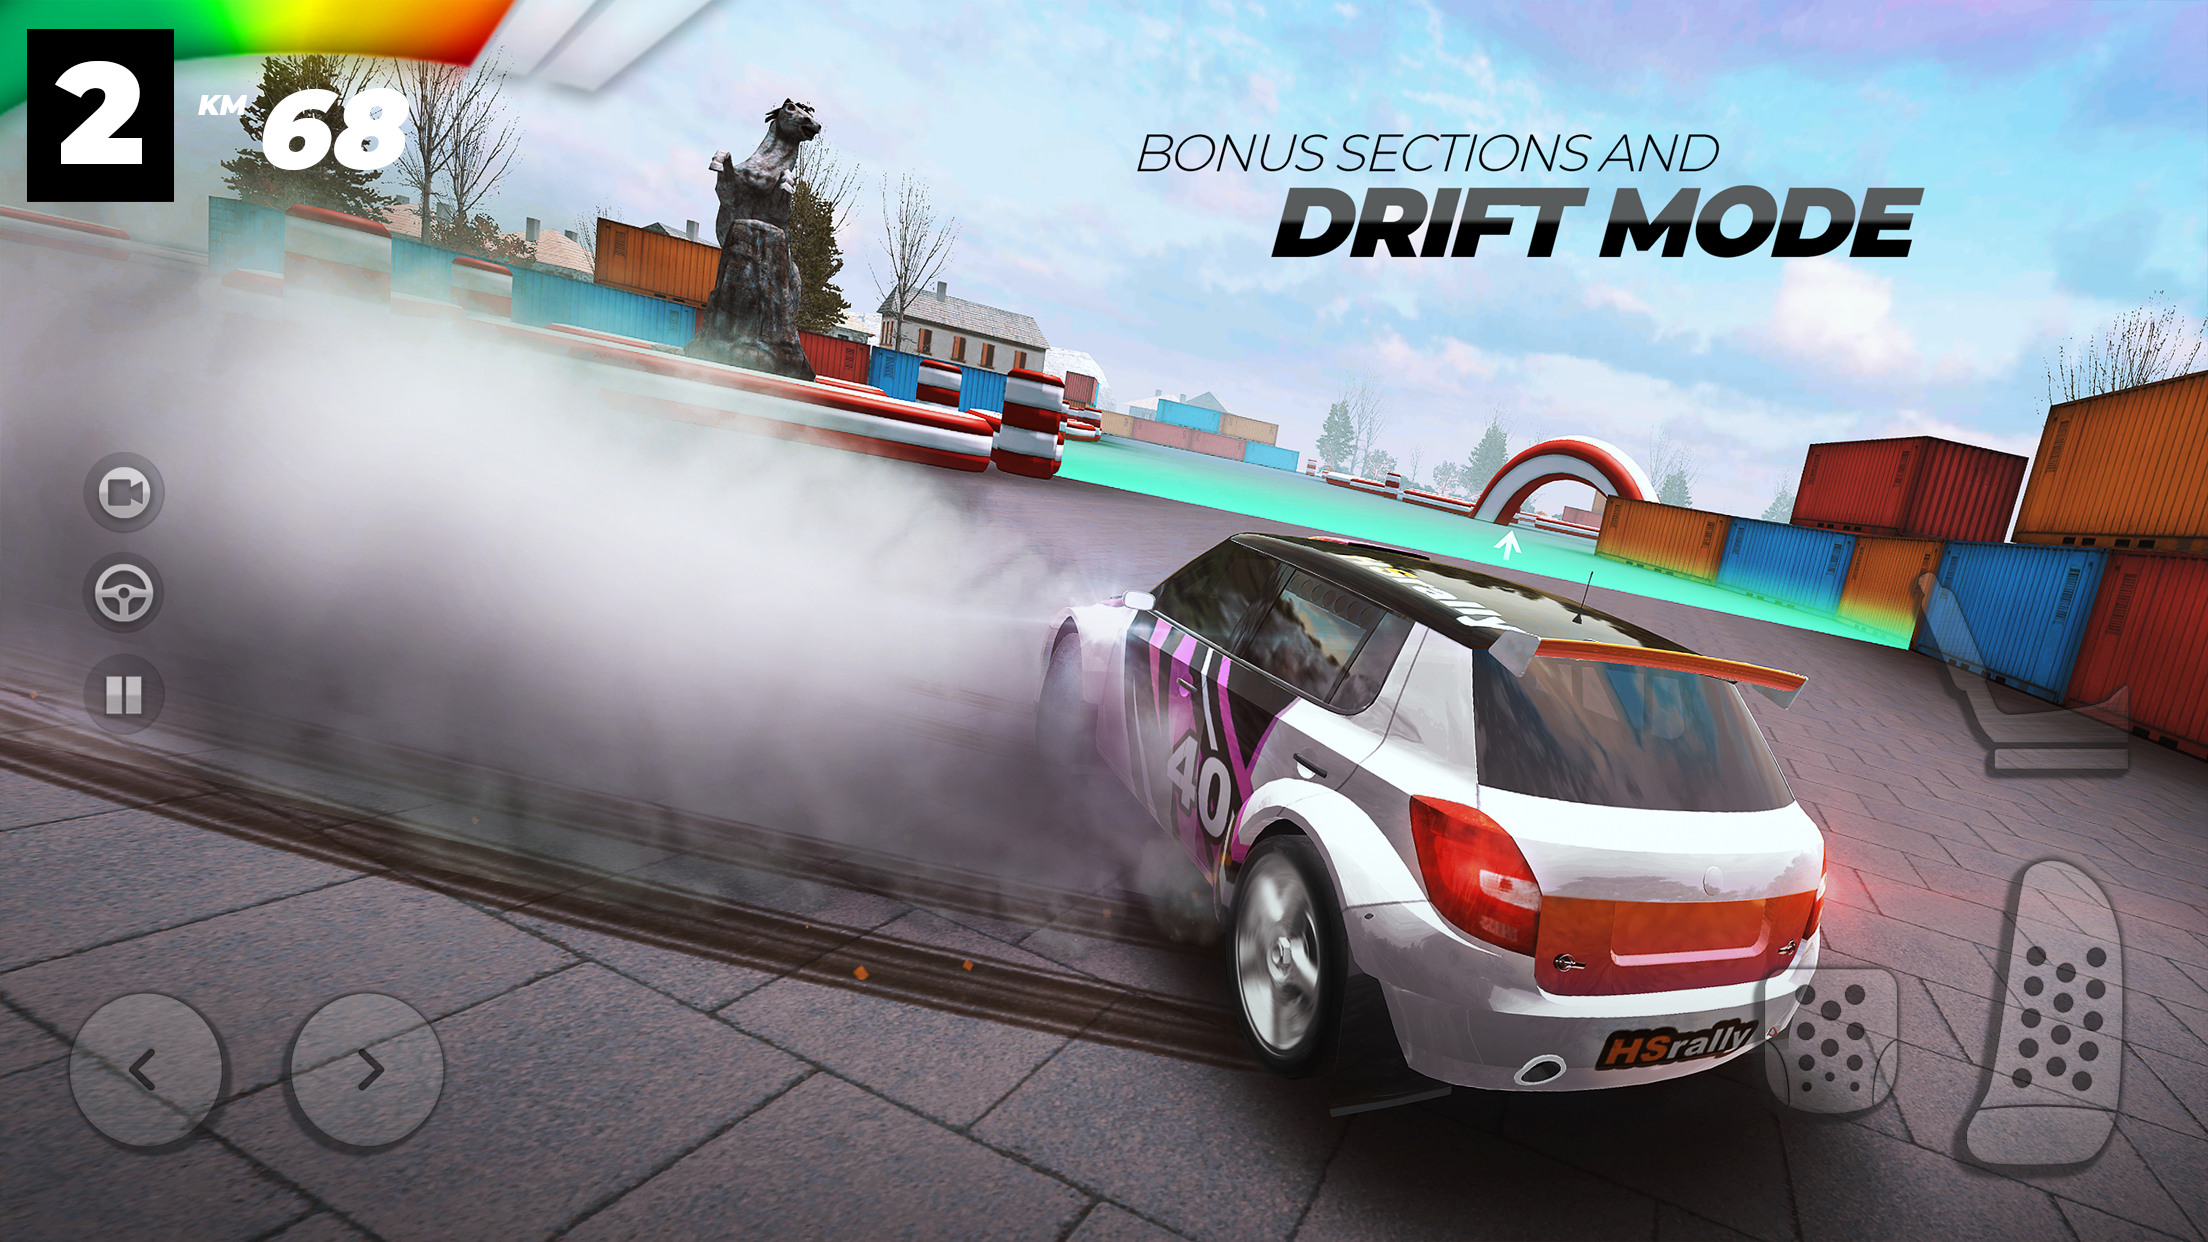 13 Best Car Drifting Games For Android/iOS With Best Physics & Graphics   Top Drifting Mobile Games! - CarX Drift Racing 2 - CarX Rally - - TapTap